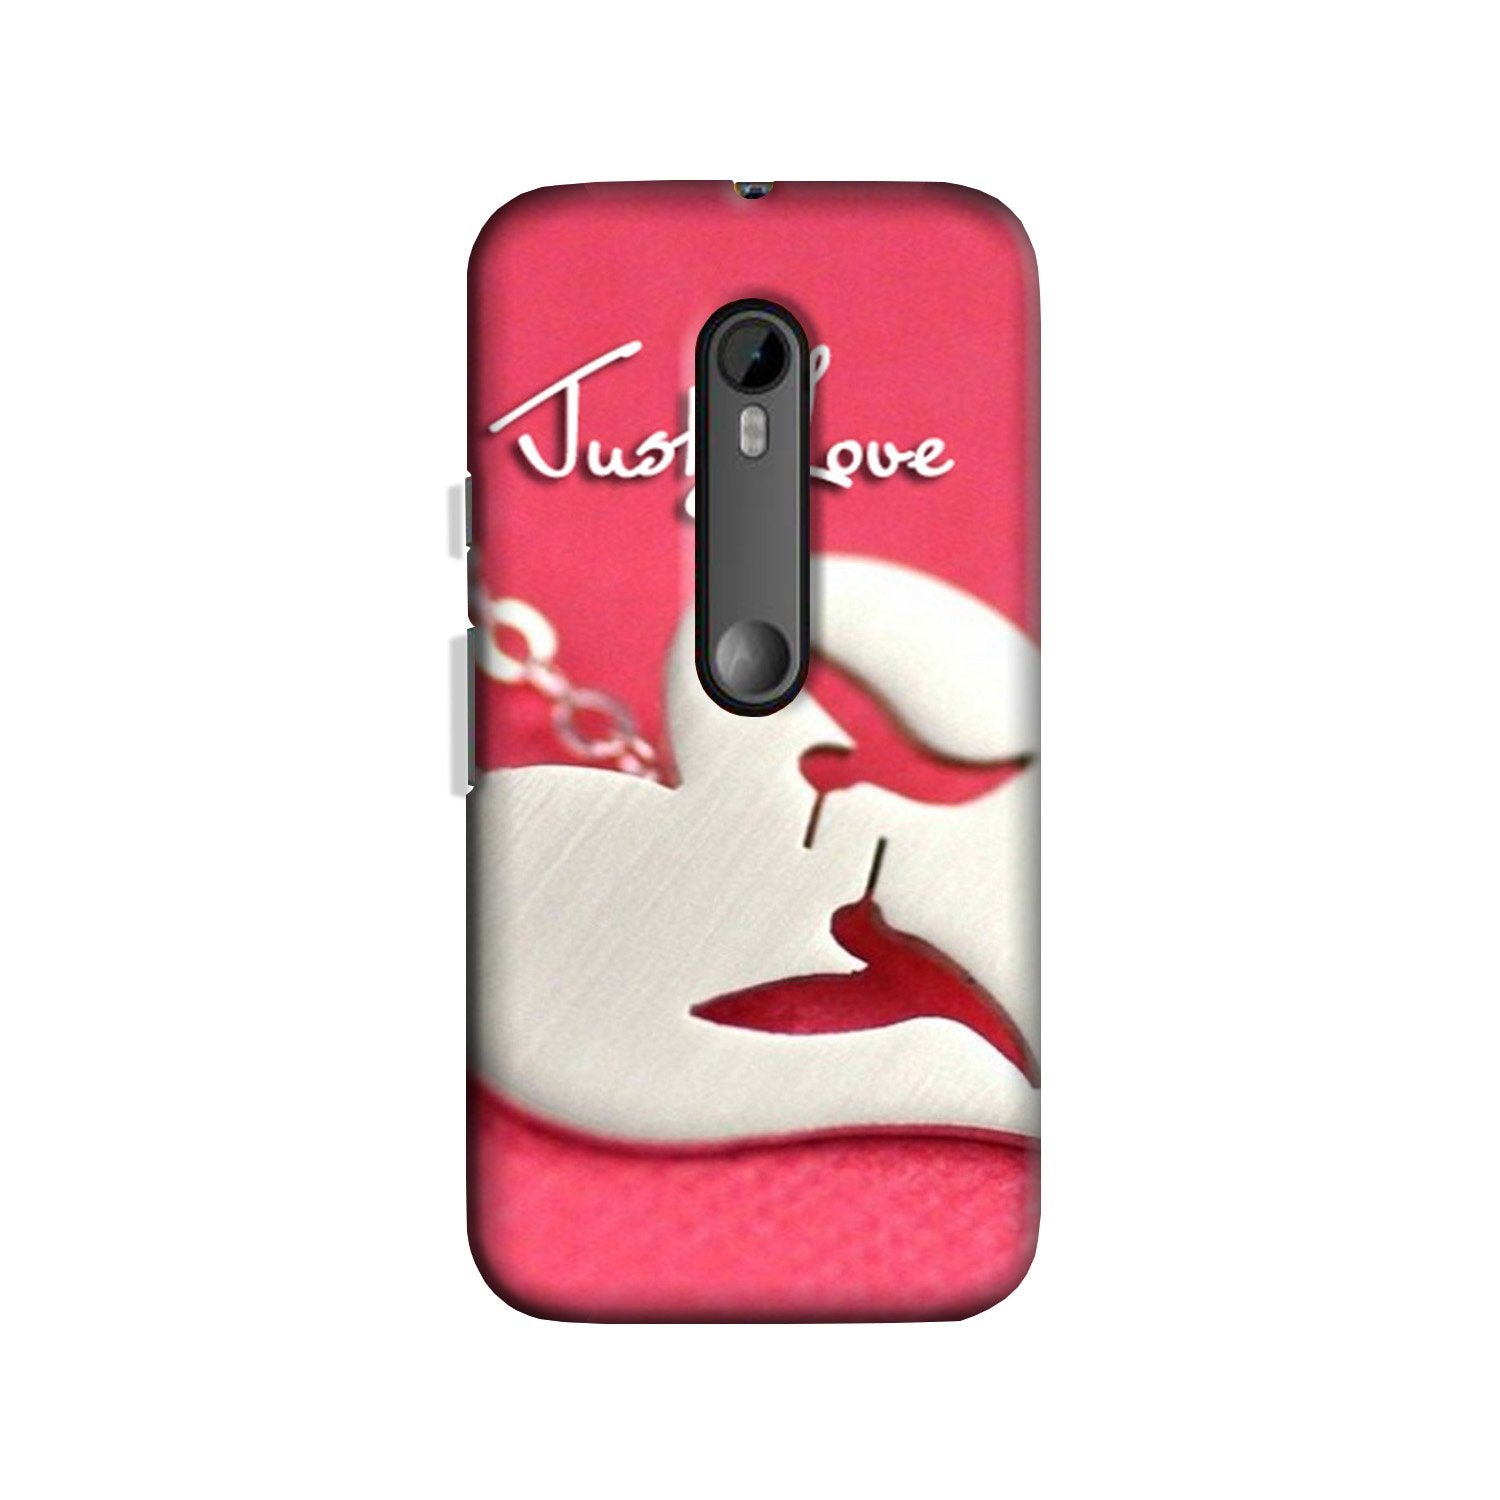 Just love Case for Moto X Play